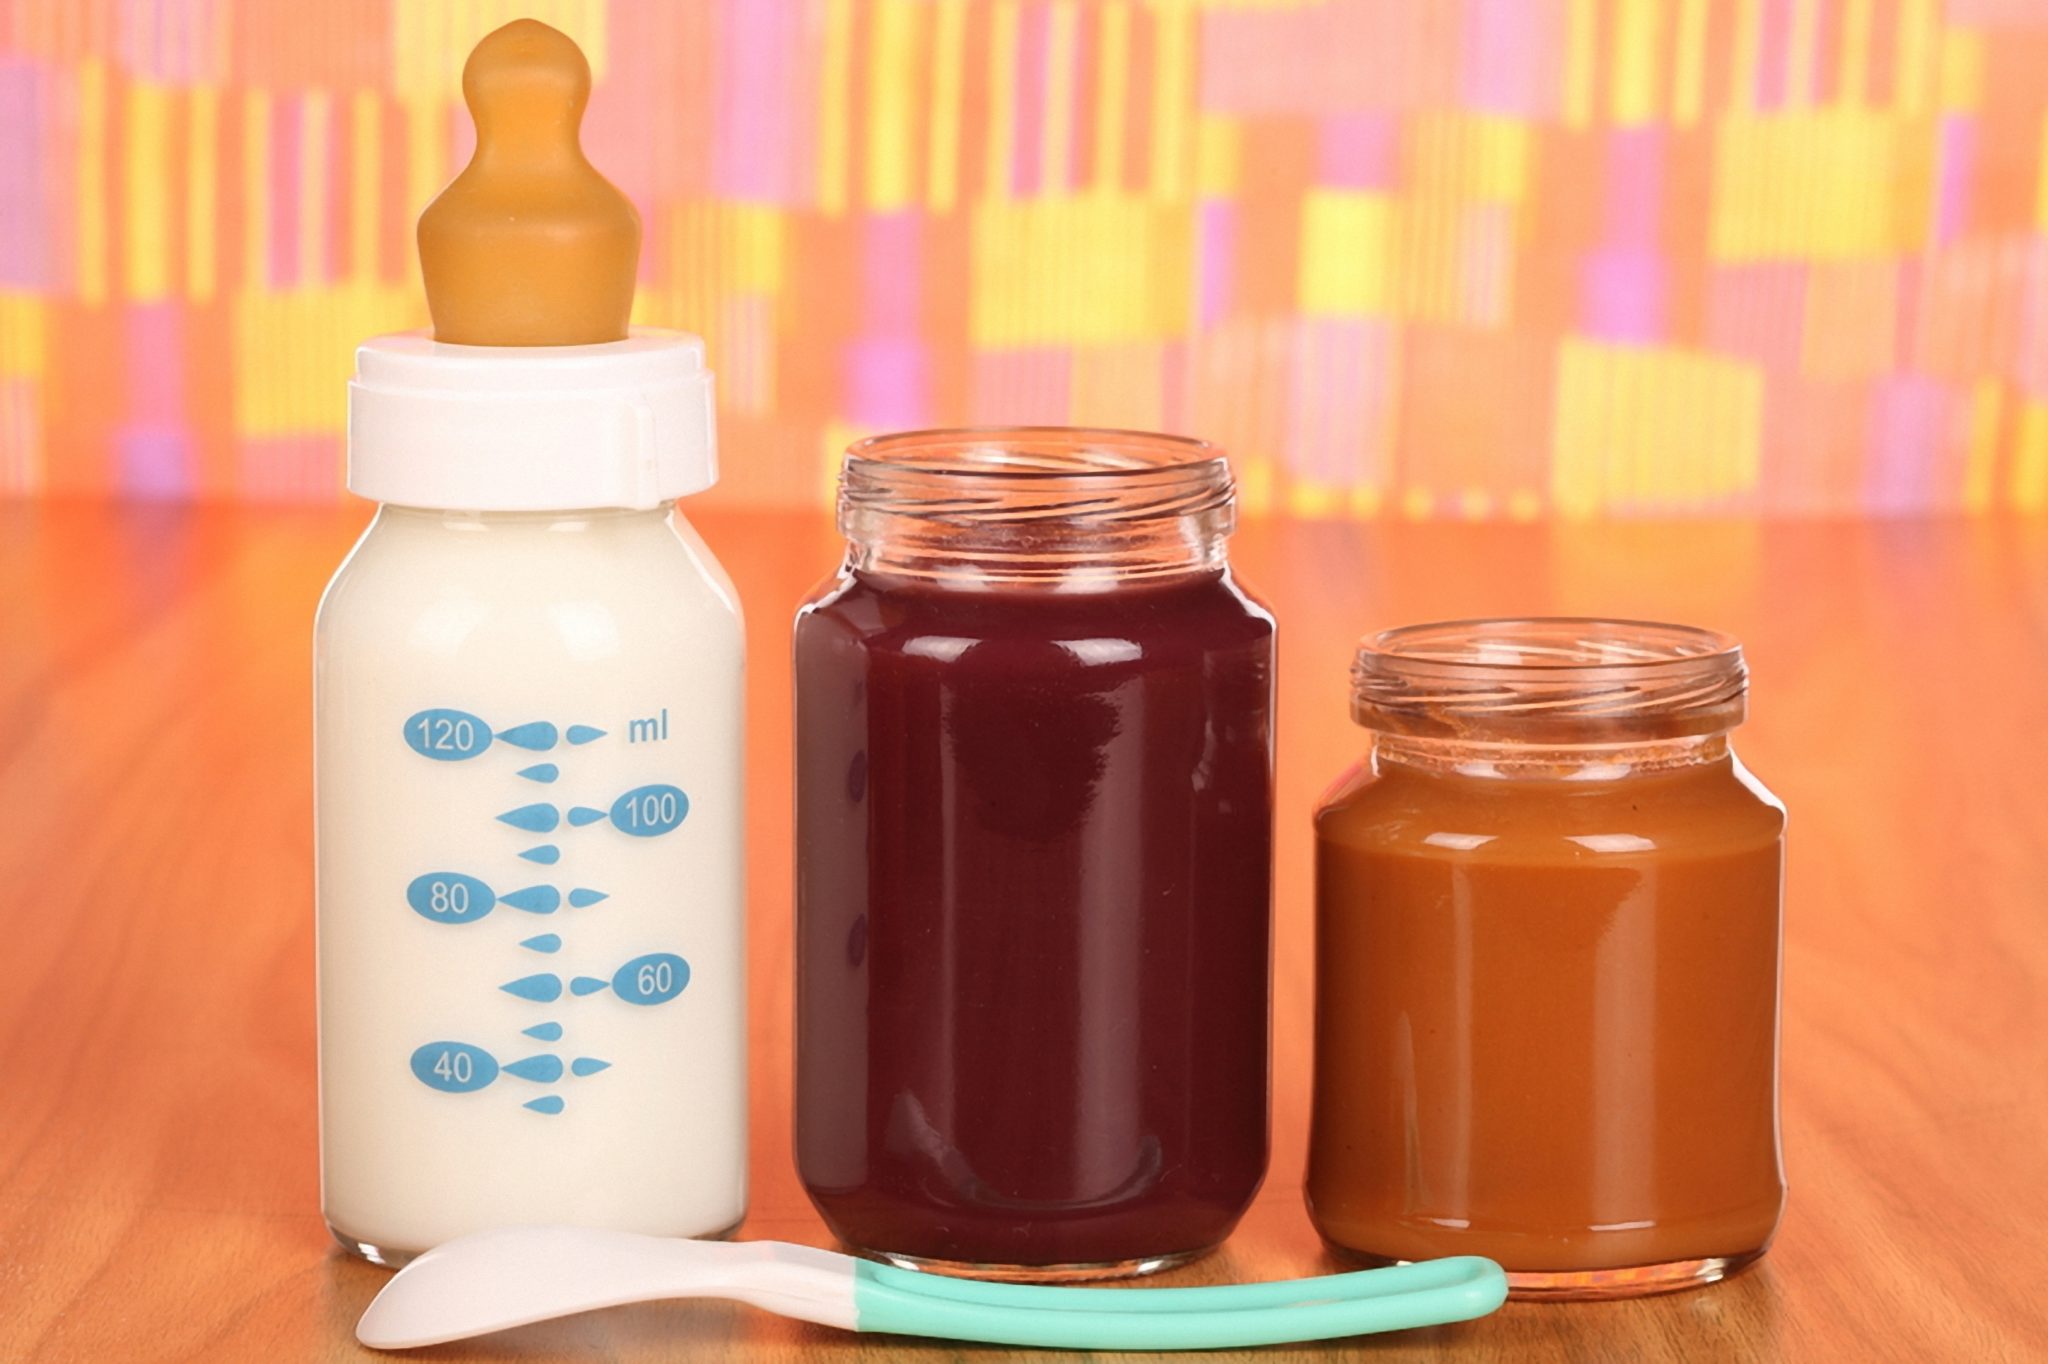 The Baby Food Market in China: a valuable Industry